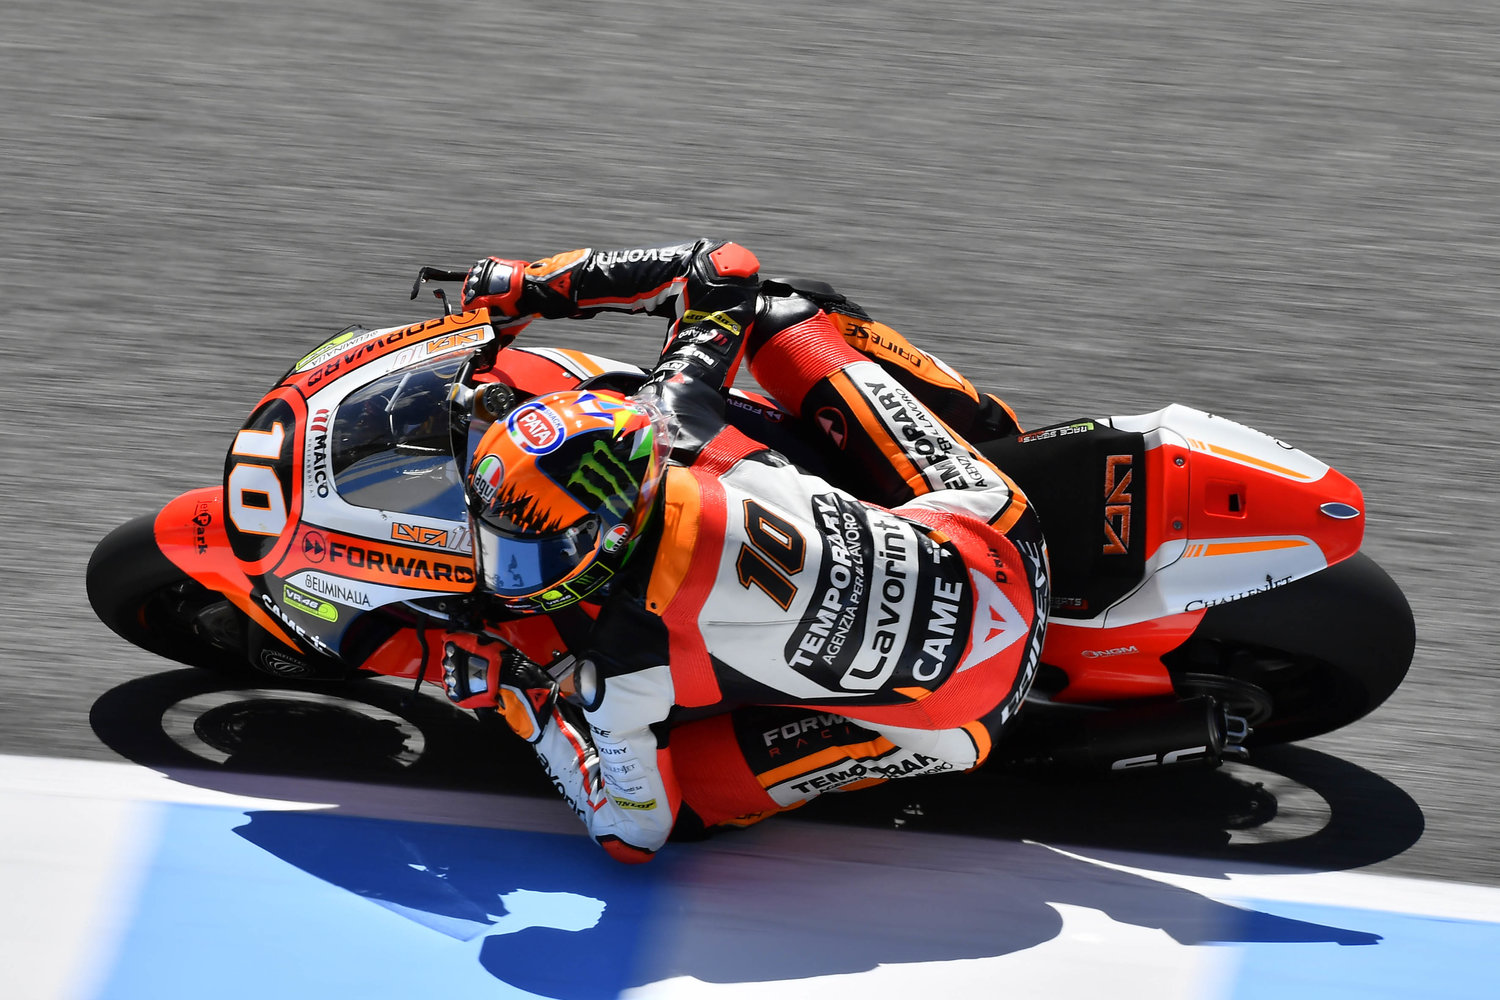 Fabulous fifth and best career result for Marini in Jerez